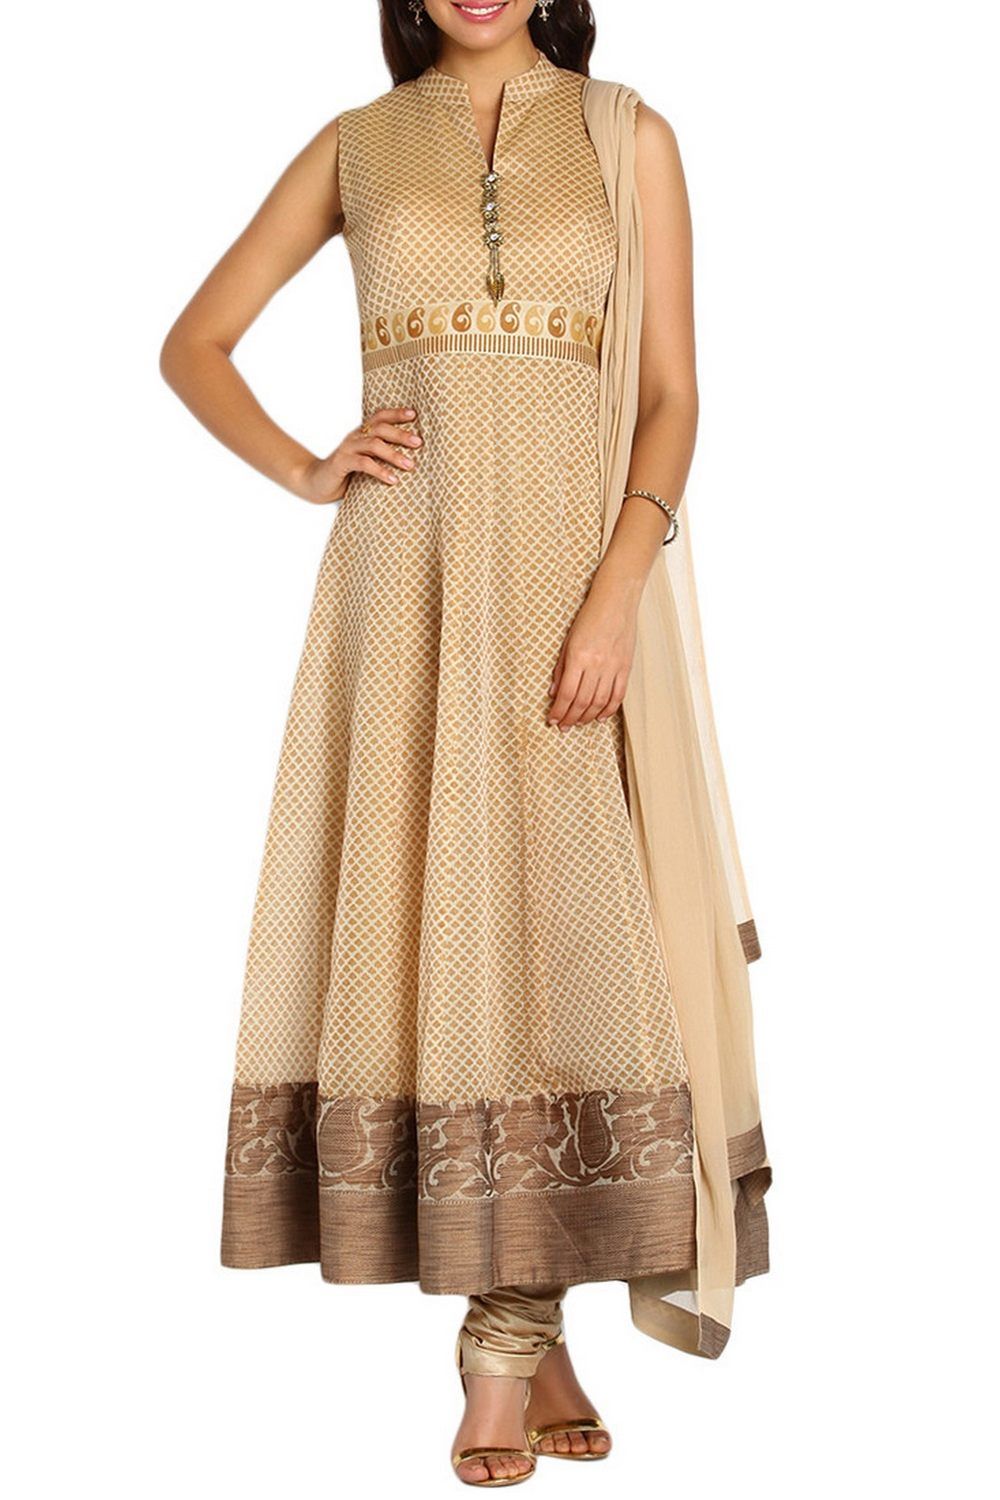 Beige Anarkali Suit Set - Indian Clothing in Denver, CO, Aurora, CO, Boulder, CO, Fort Collins, CO, Colorado Springs, CO, Parker, CO, Highlands Ranch, CO, Cherry Creek, CO, Centennial, CO, and Longmont, CO. Nationwide shipping USA - India Fashion X